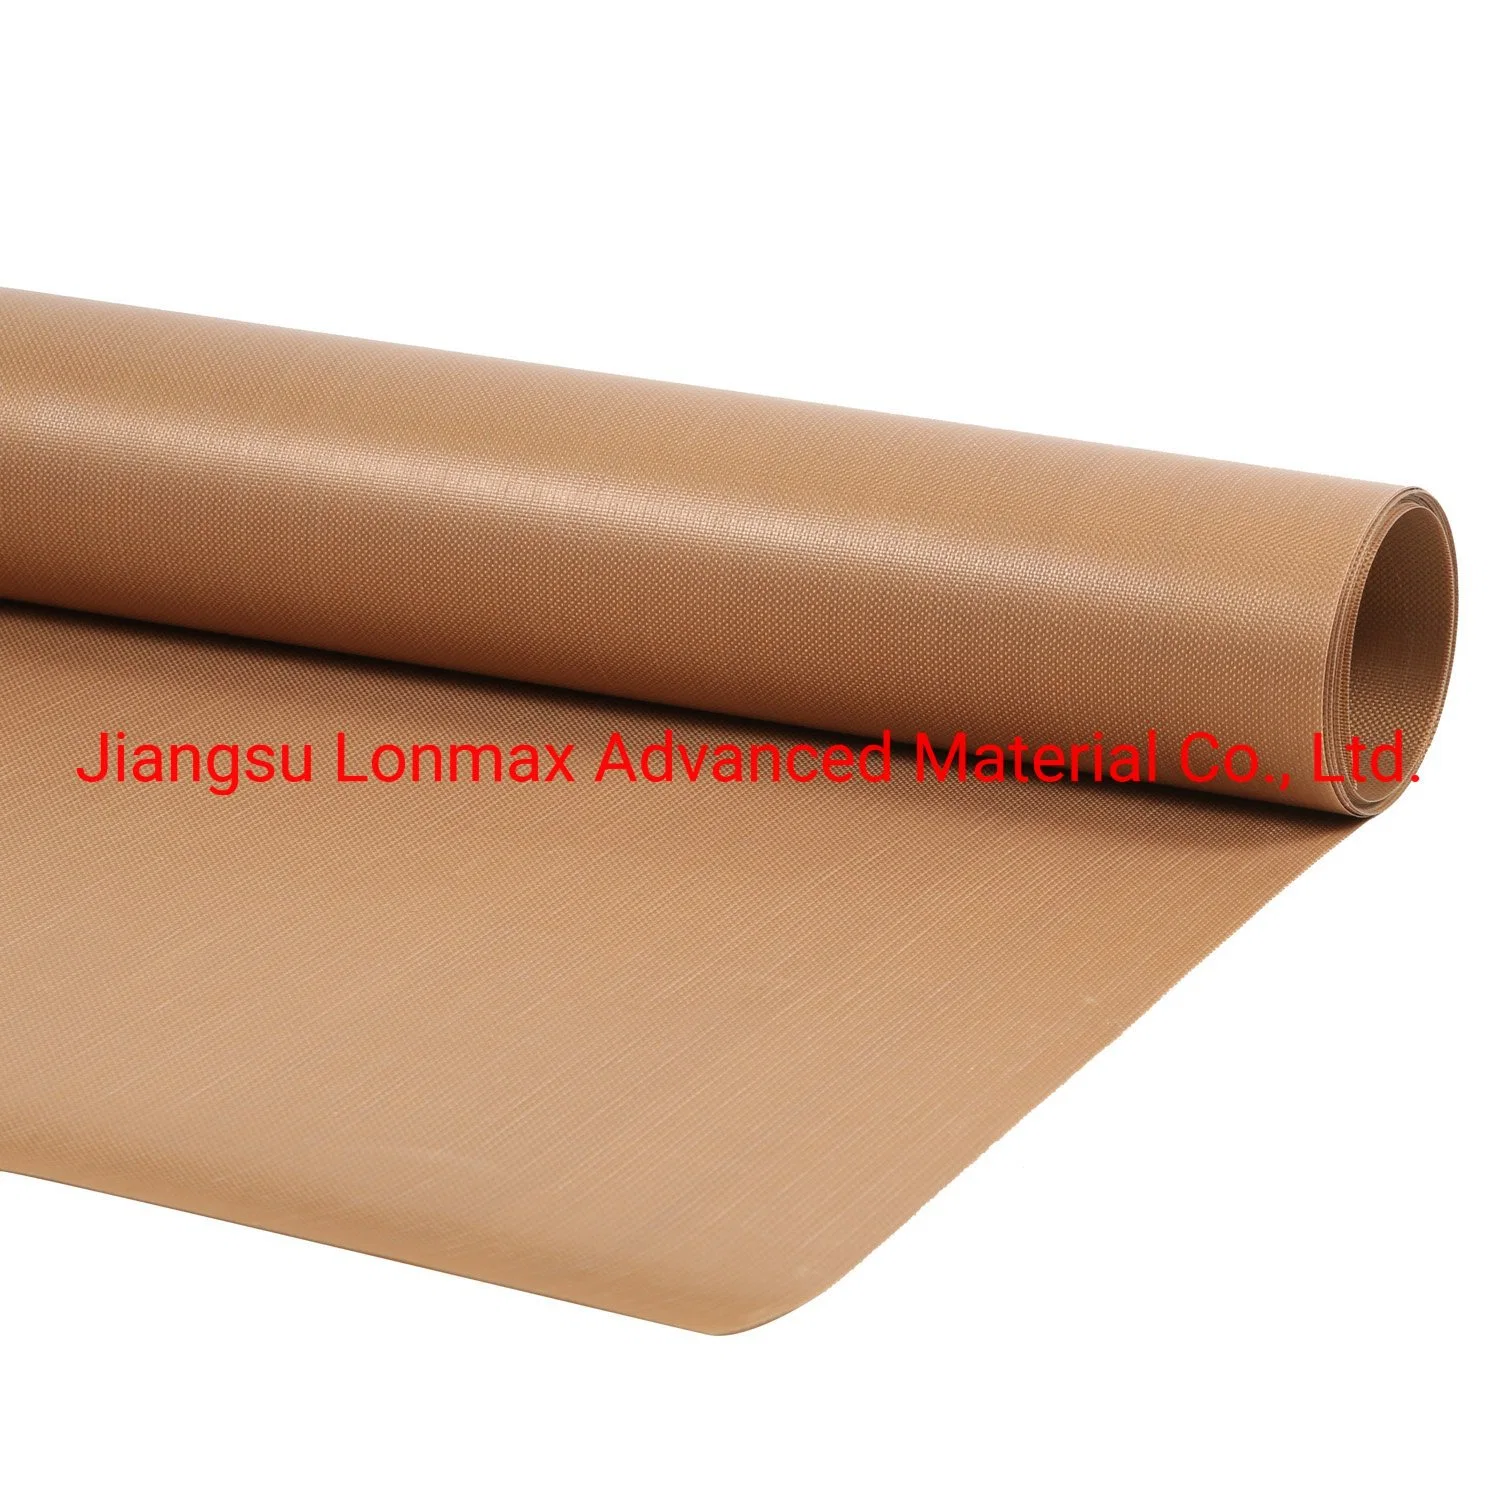 Hot Selling PTFE Fabric Made of Fiberglass with Good Quality